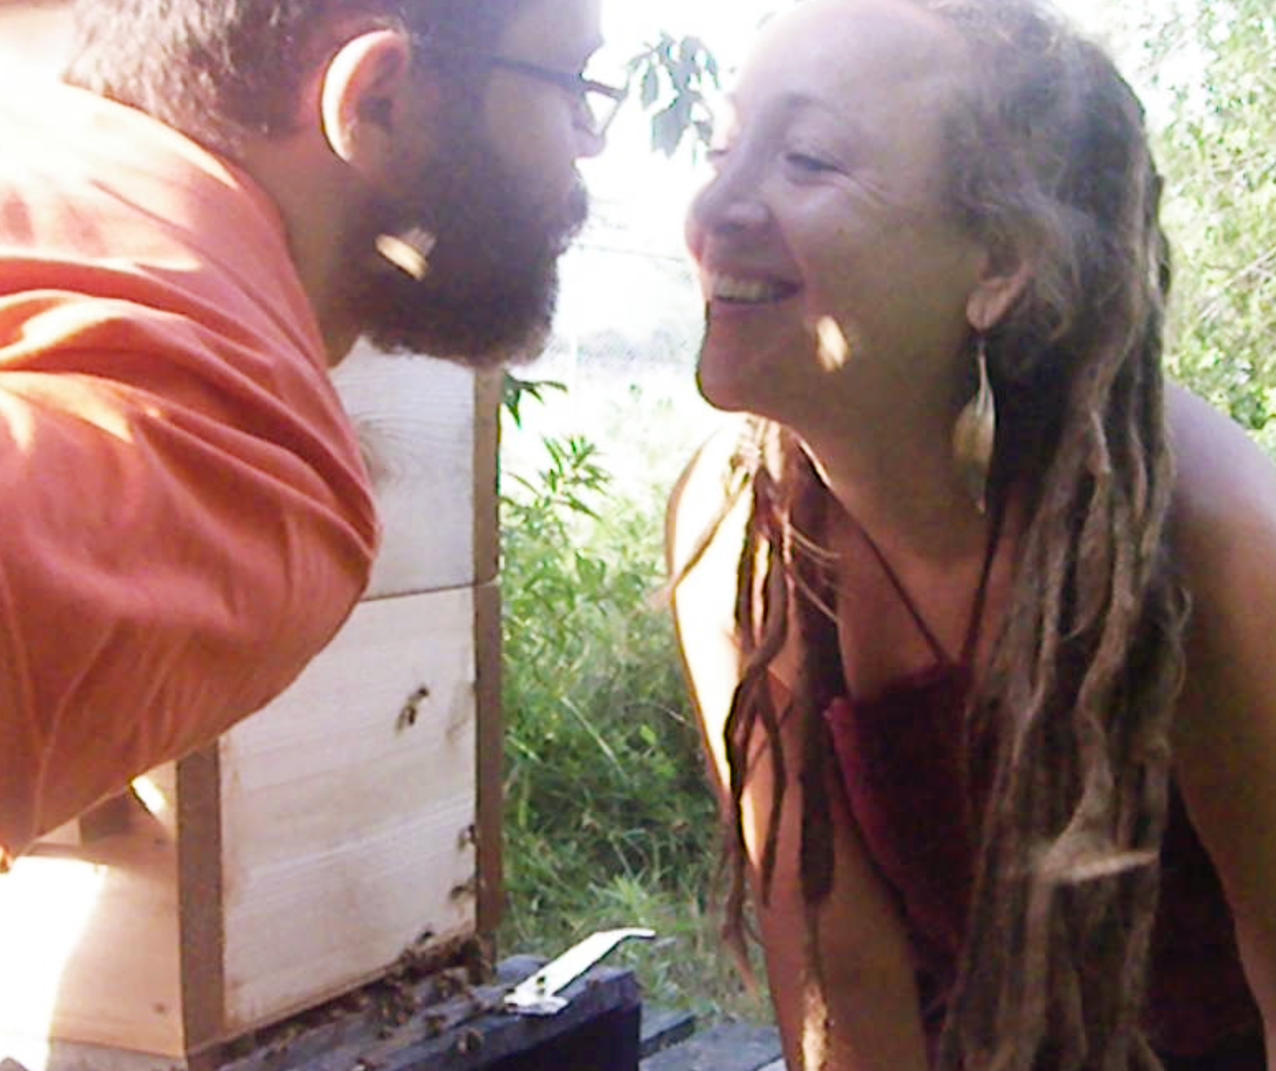 Couple gazing lovingly into each others eyes in front of hive